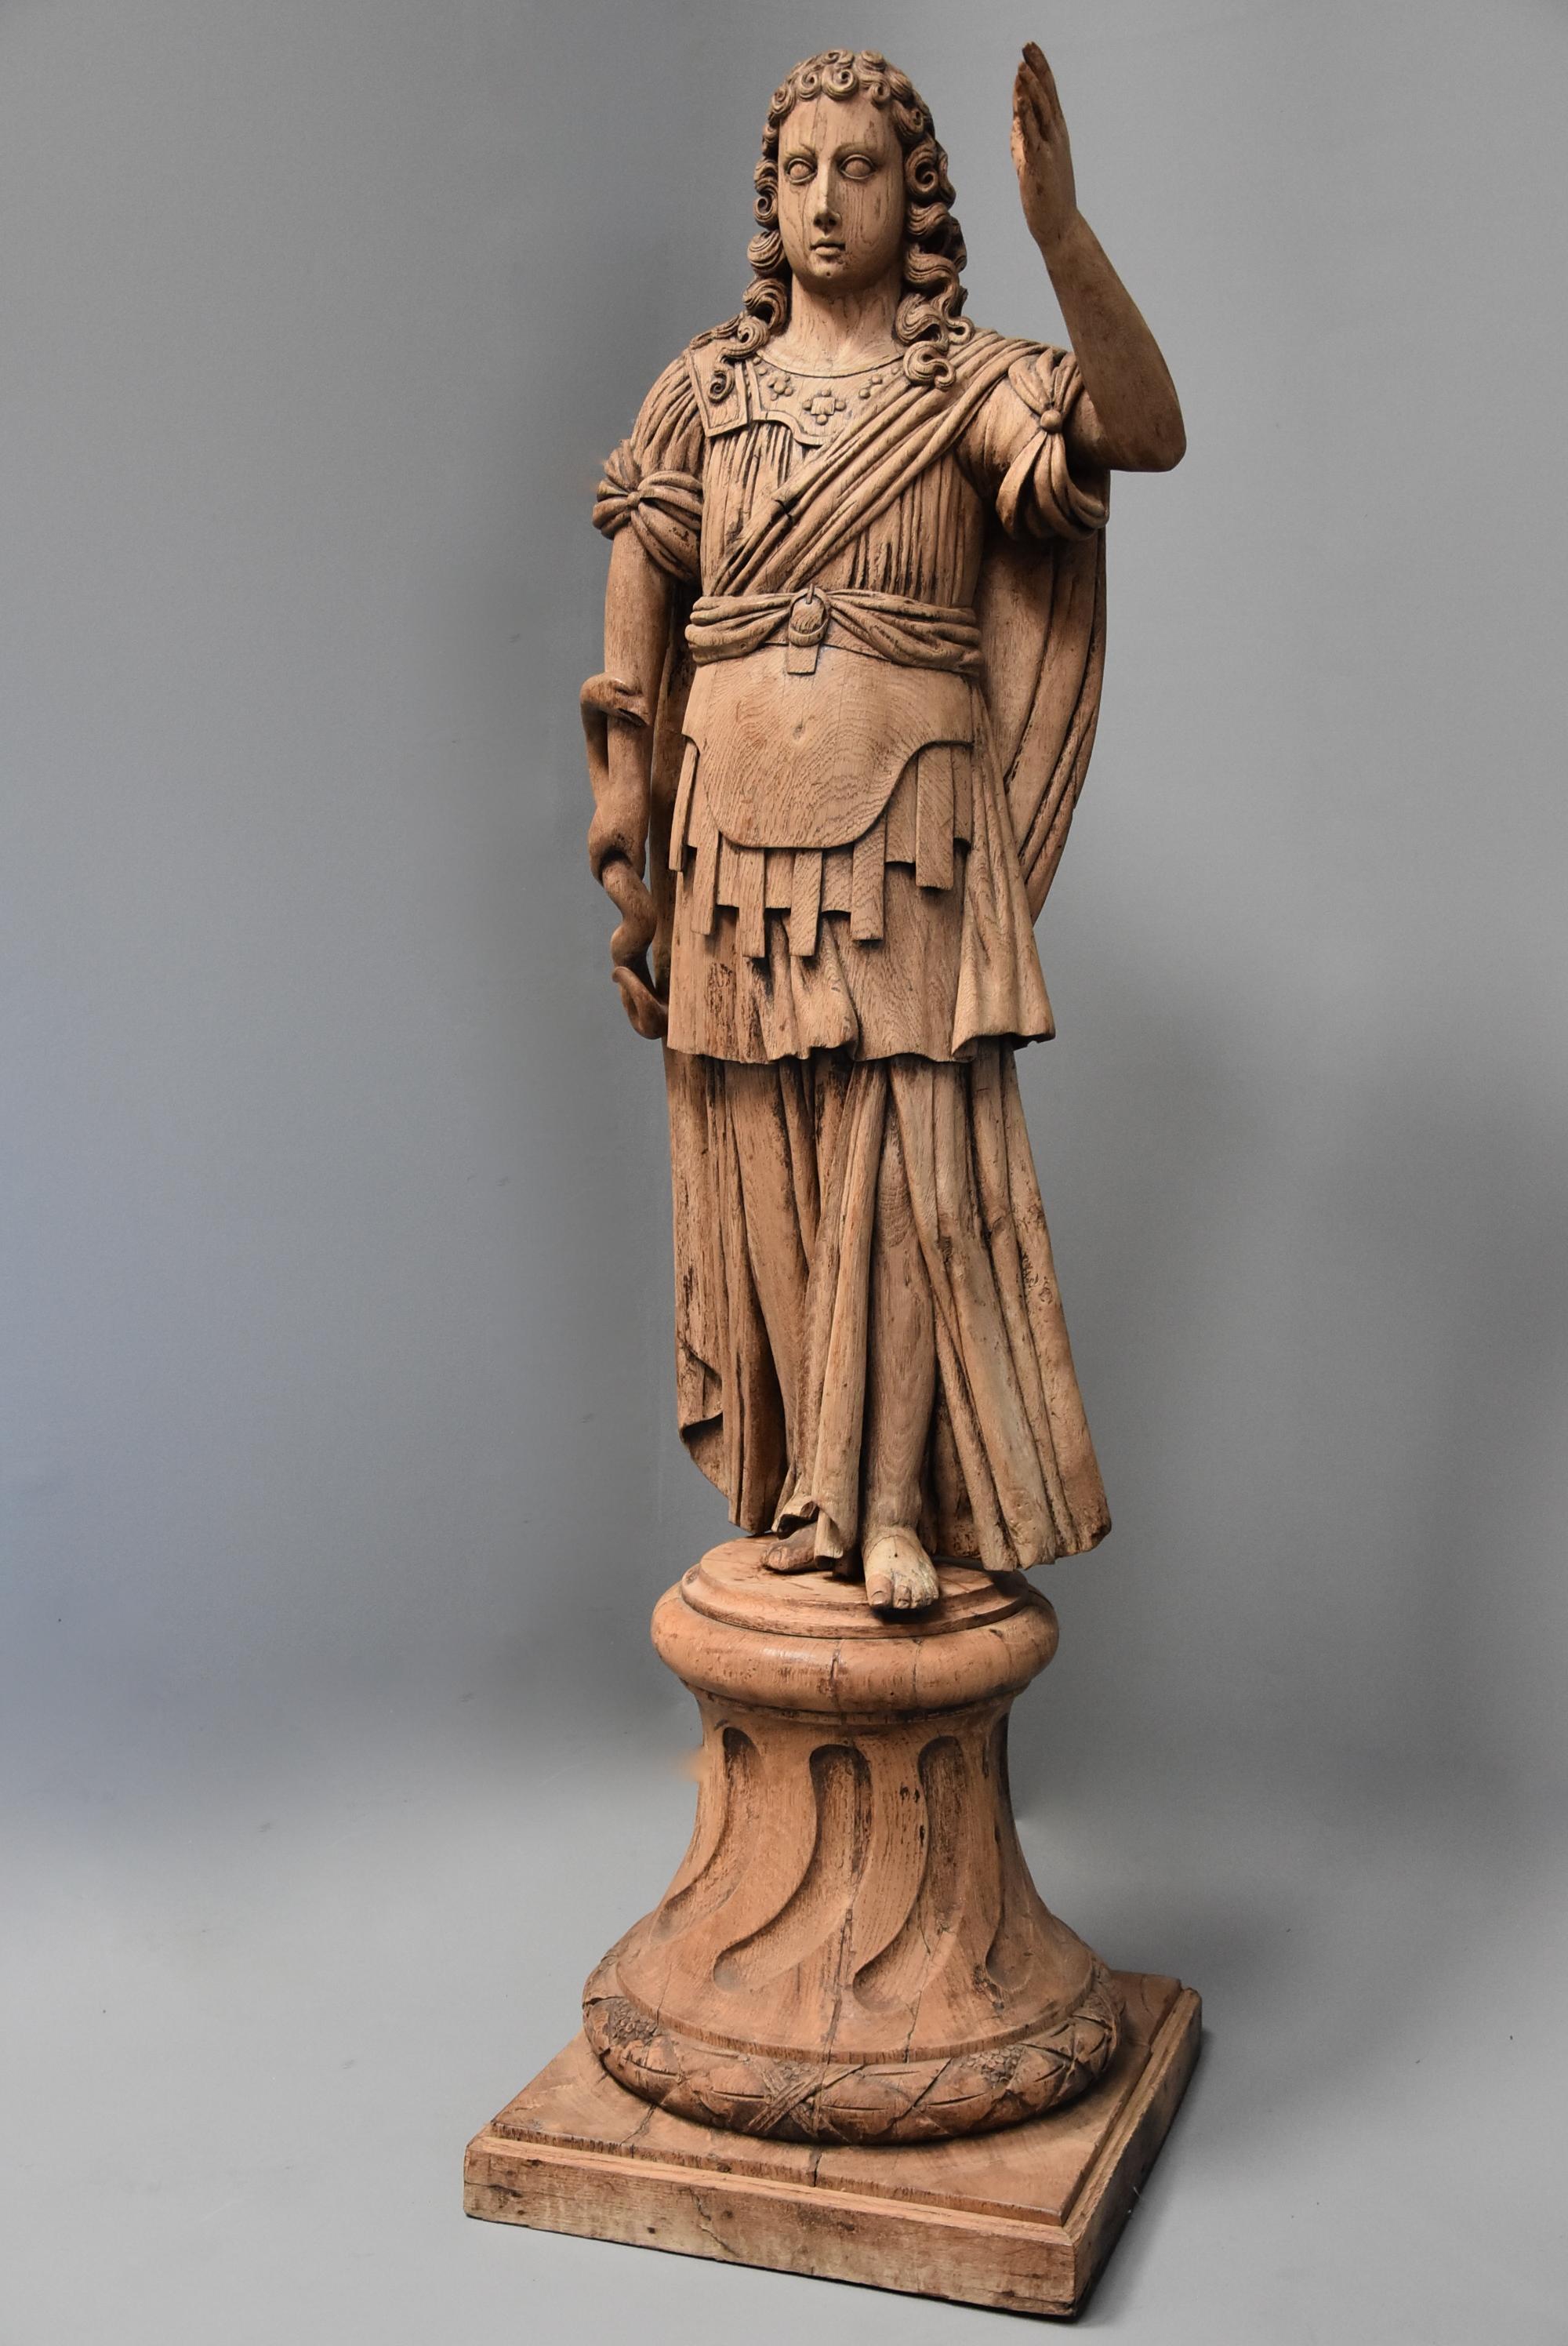 A large highly decorative 18th century Continental life-size carved oak figure of possibly the Greek God of Medicine, Asclepius.

This figure consists of a life size oak carved figure (possibly originally polychromed), his long curly hair resting